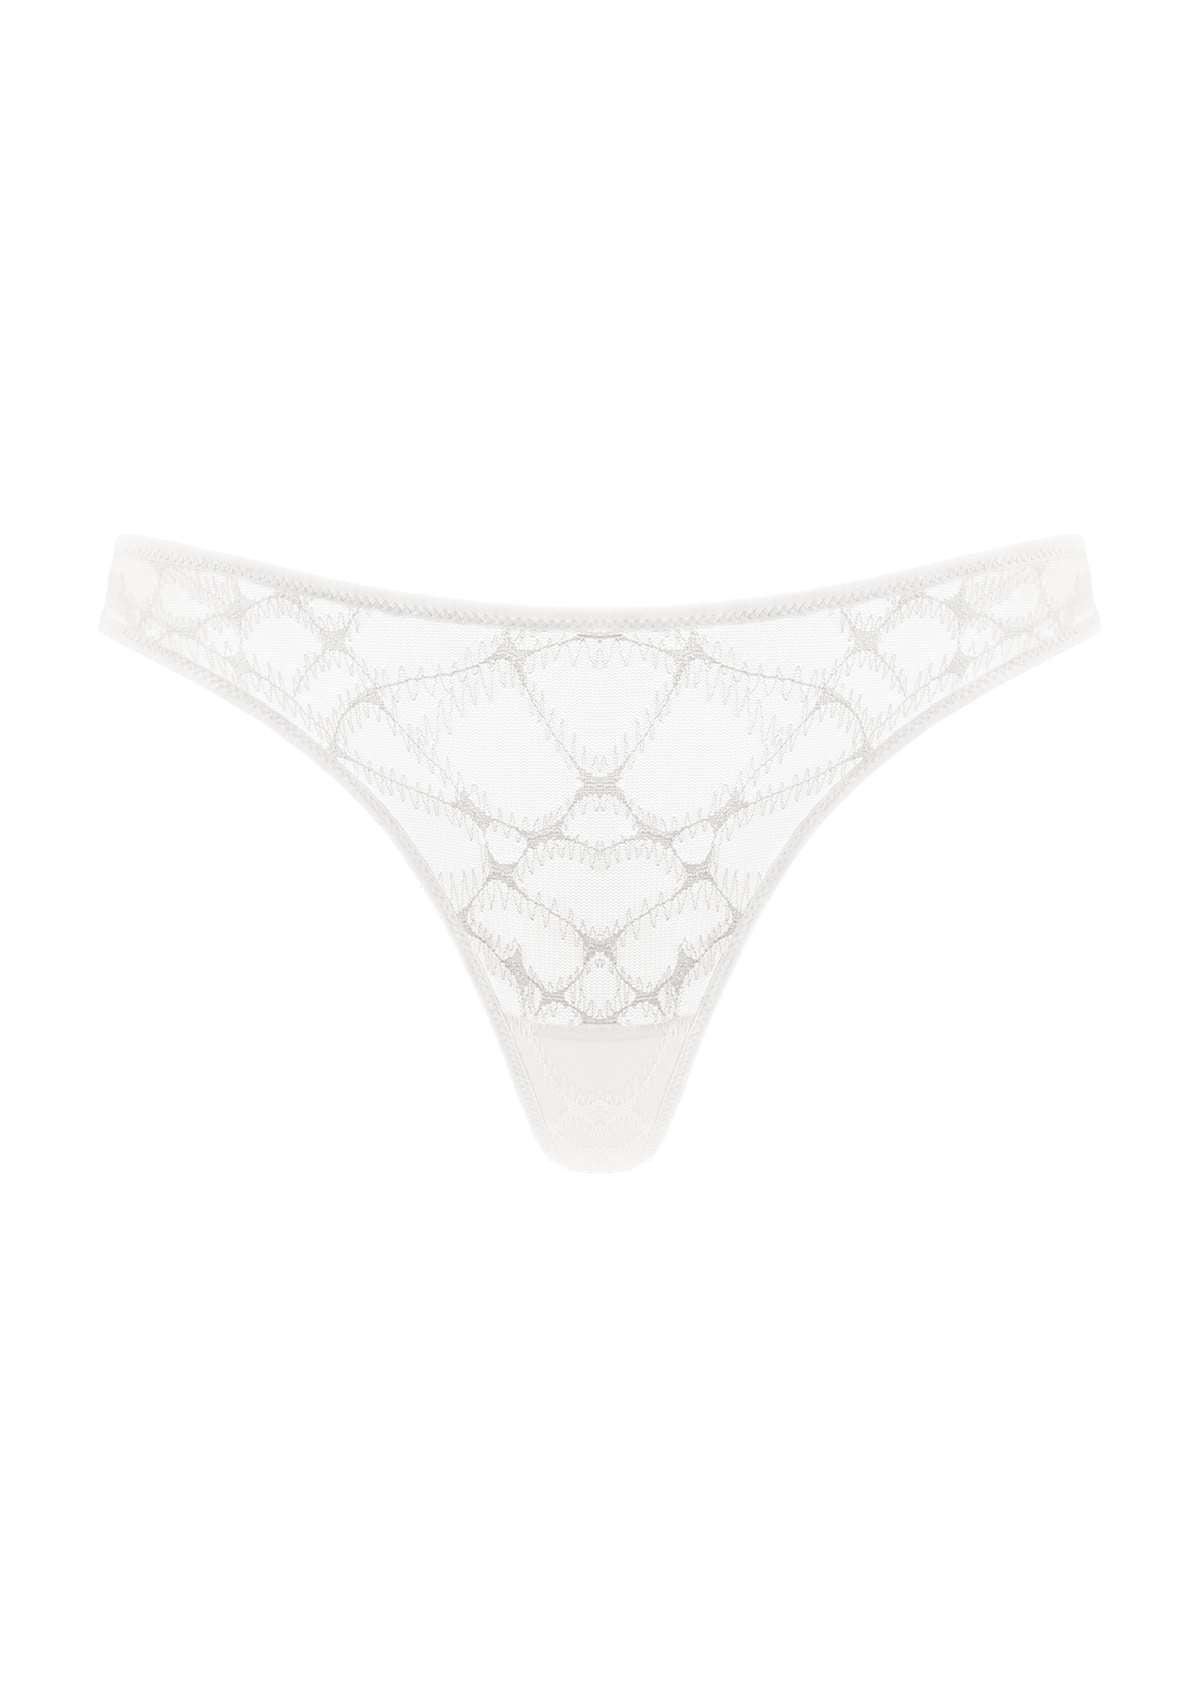 HSIA Soft Sexy Mesh Thong Underwear 3 Pack - S / Black+White+Light Coral